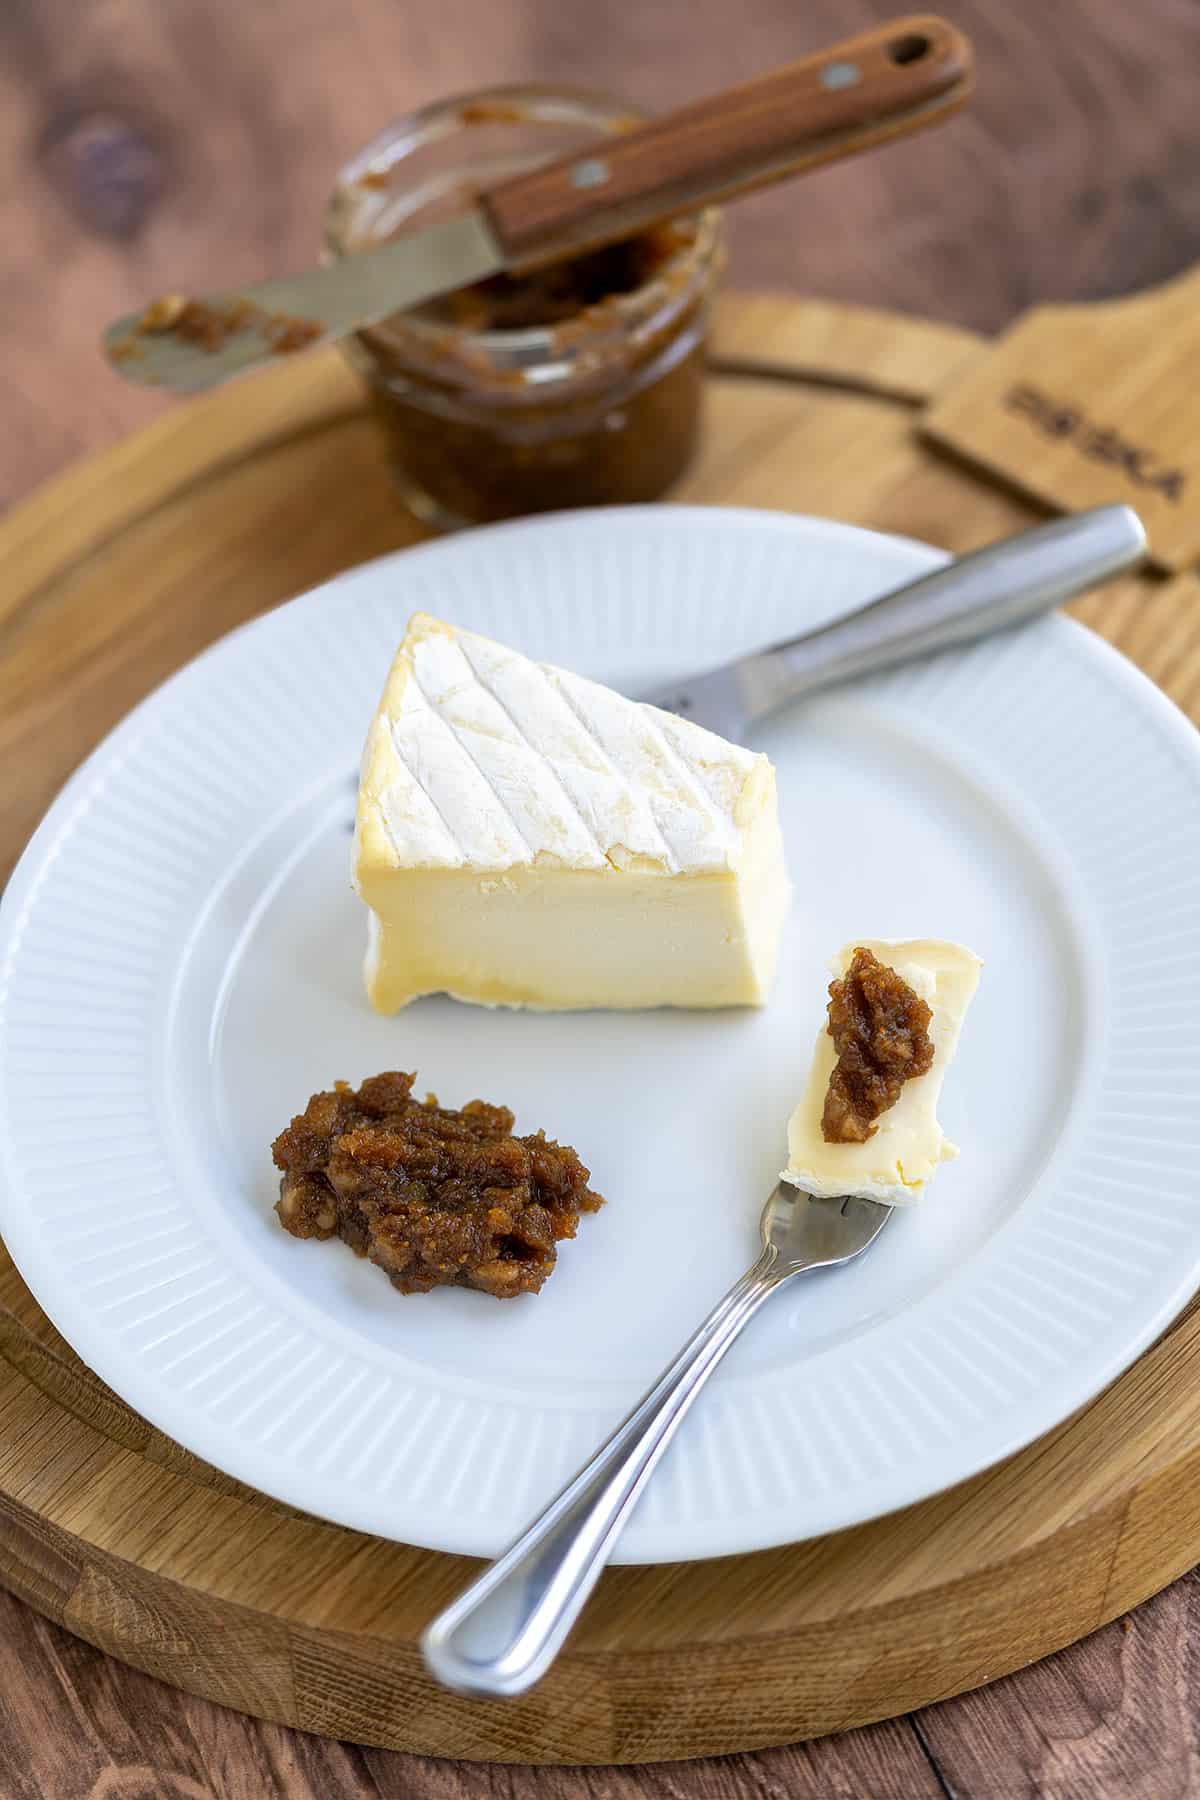 A piece of Brie cheese on a plate with fig filling on top of the Brie.